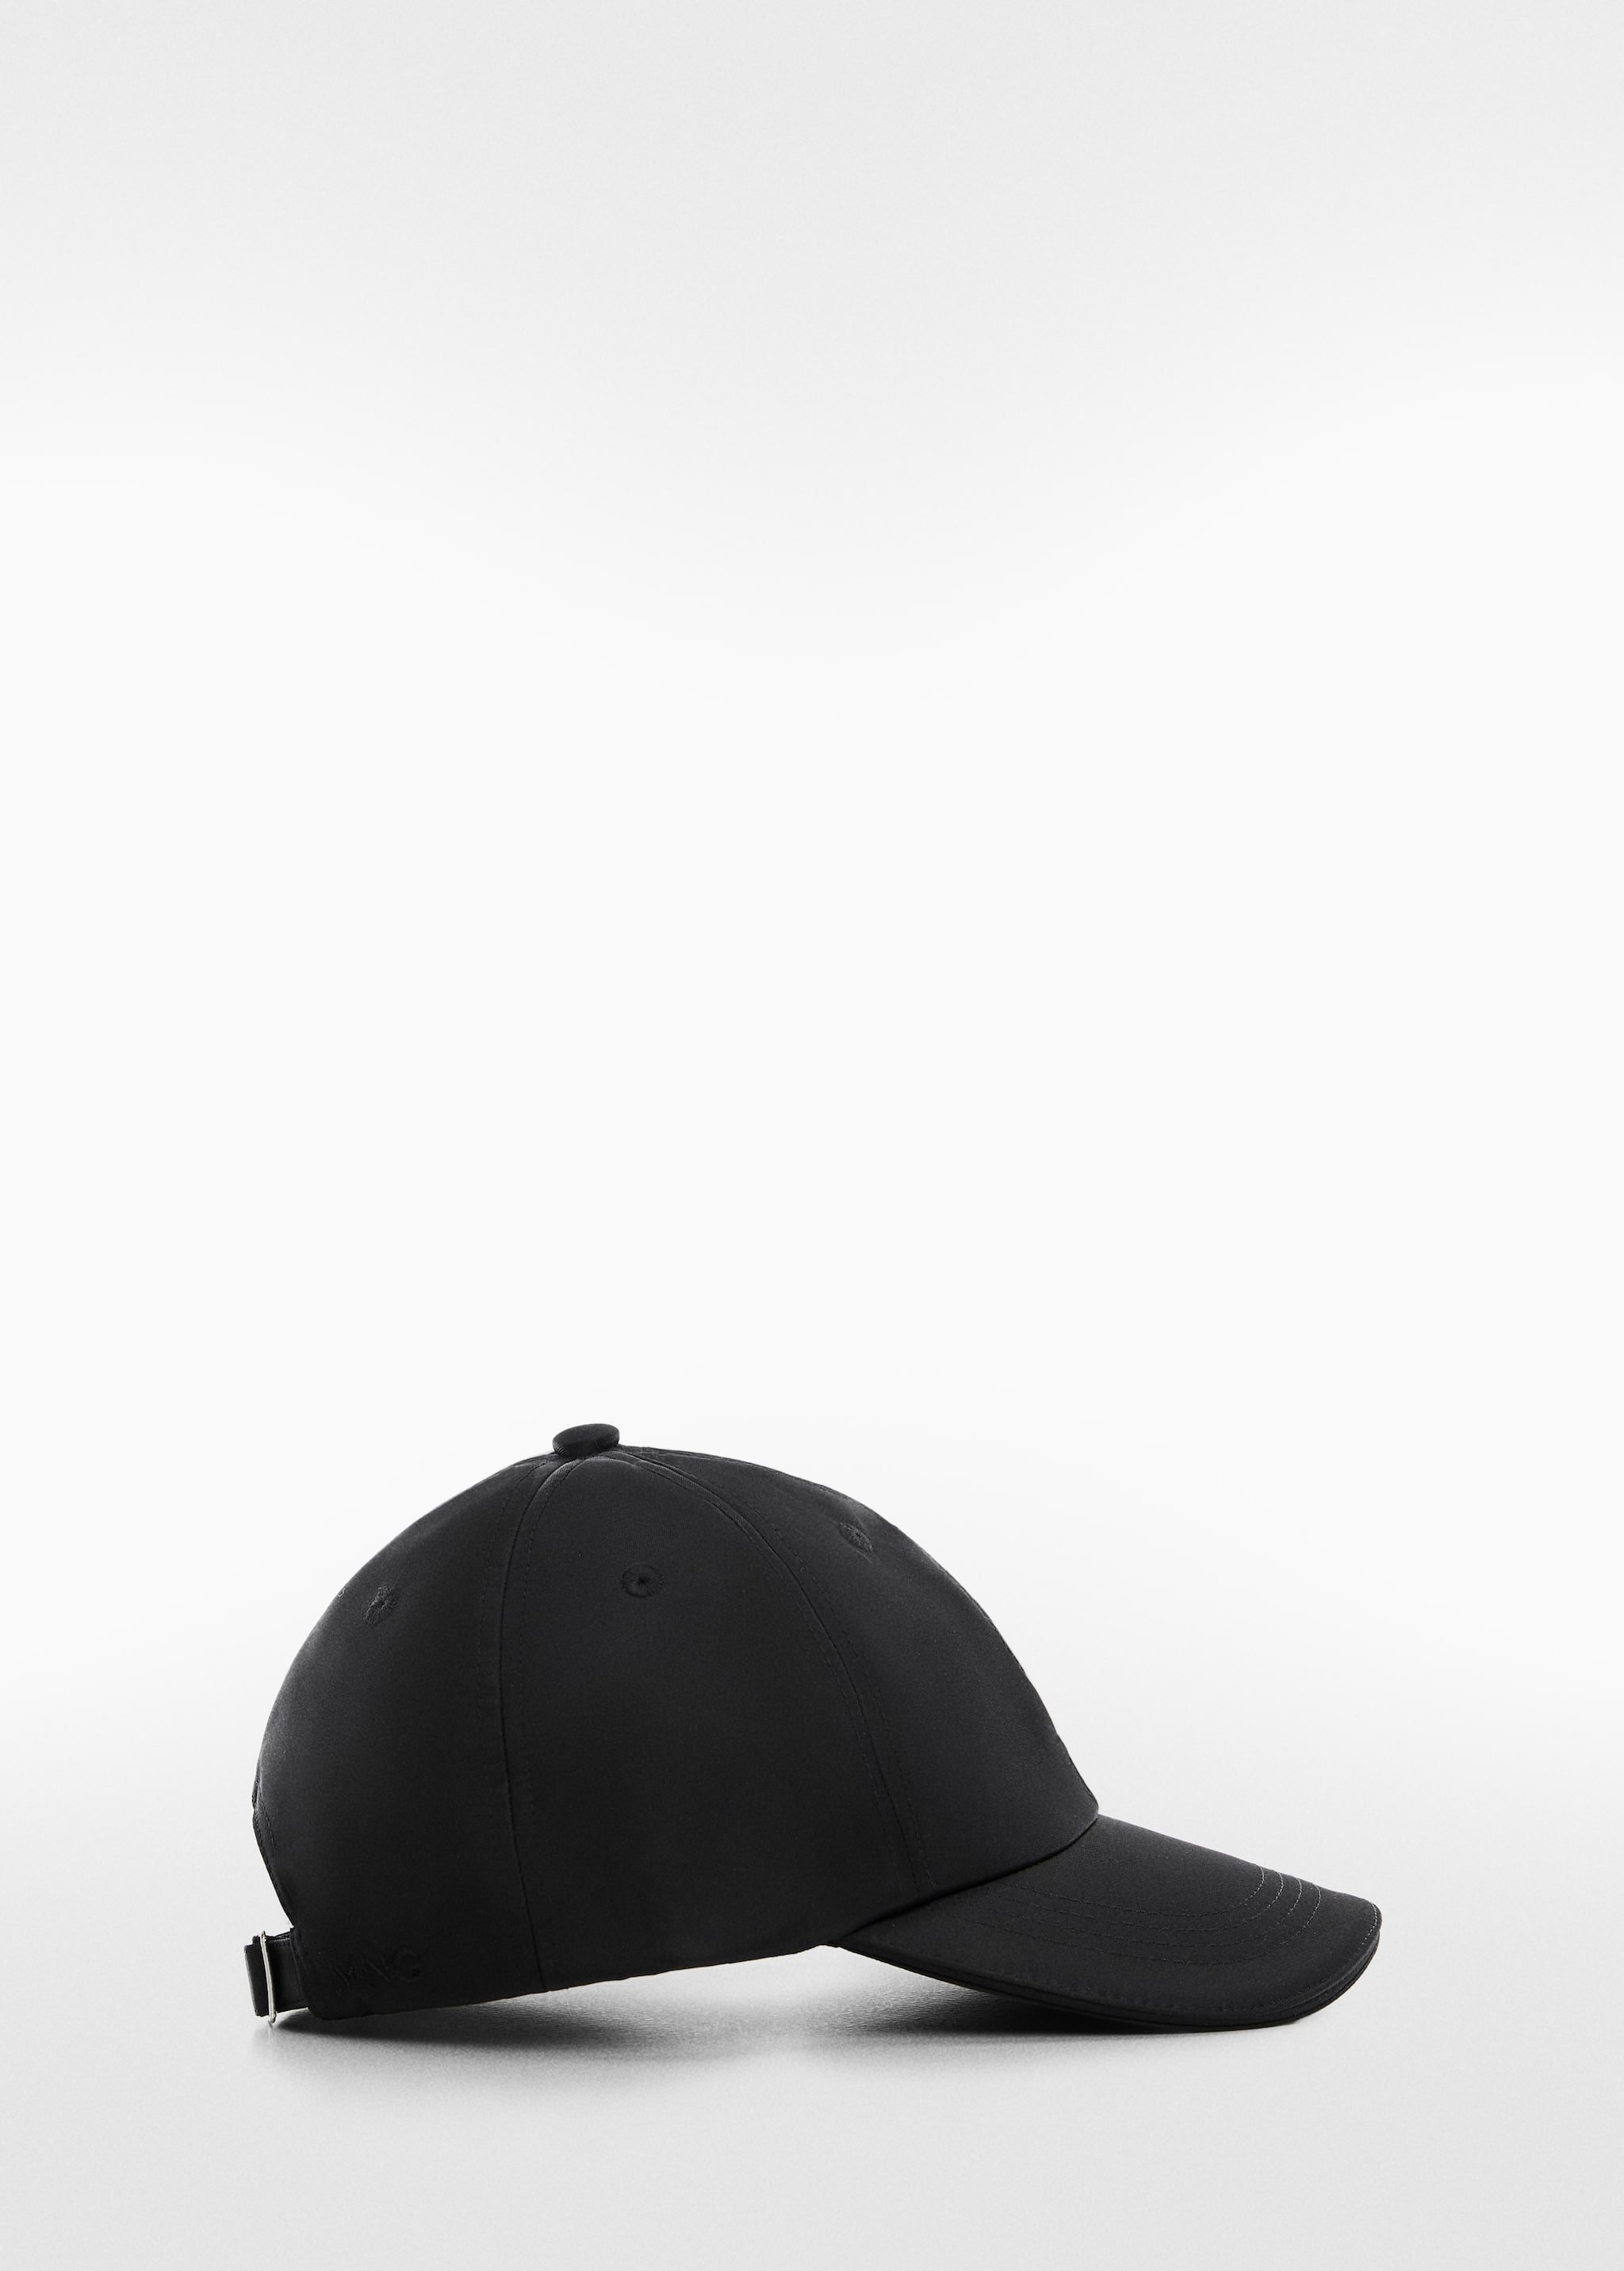 Soft visor cap - Article without model